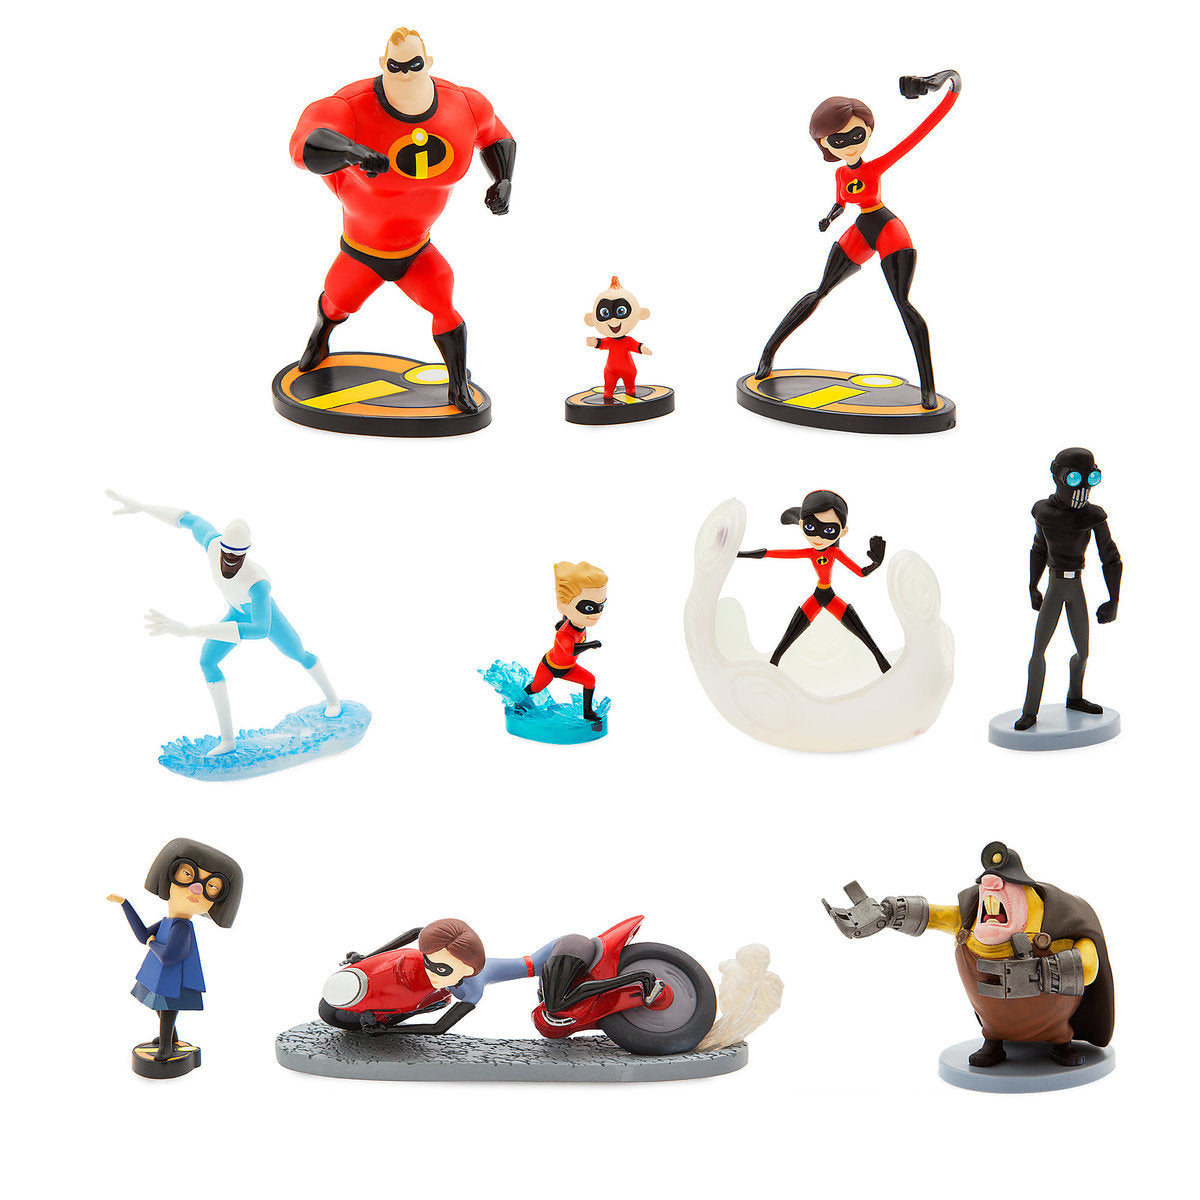 Disney Store Incredibles 2 Deluxe Figure Set 10 Play Set Playset Cake Topper New